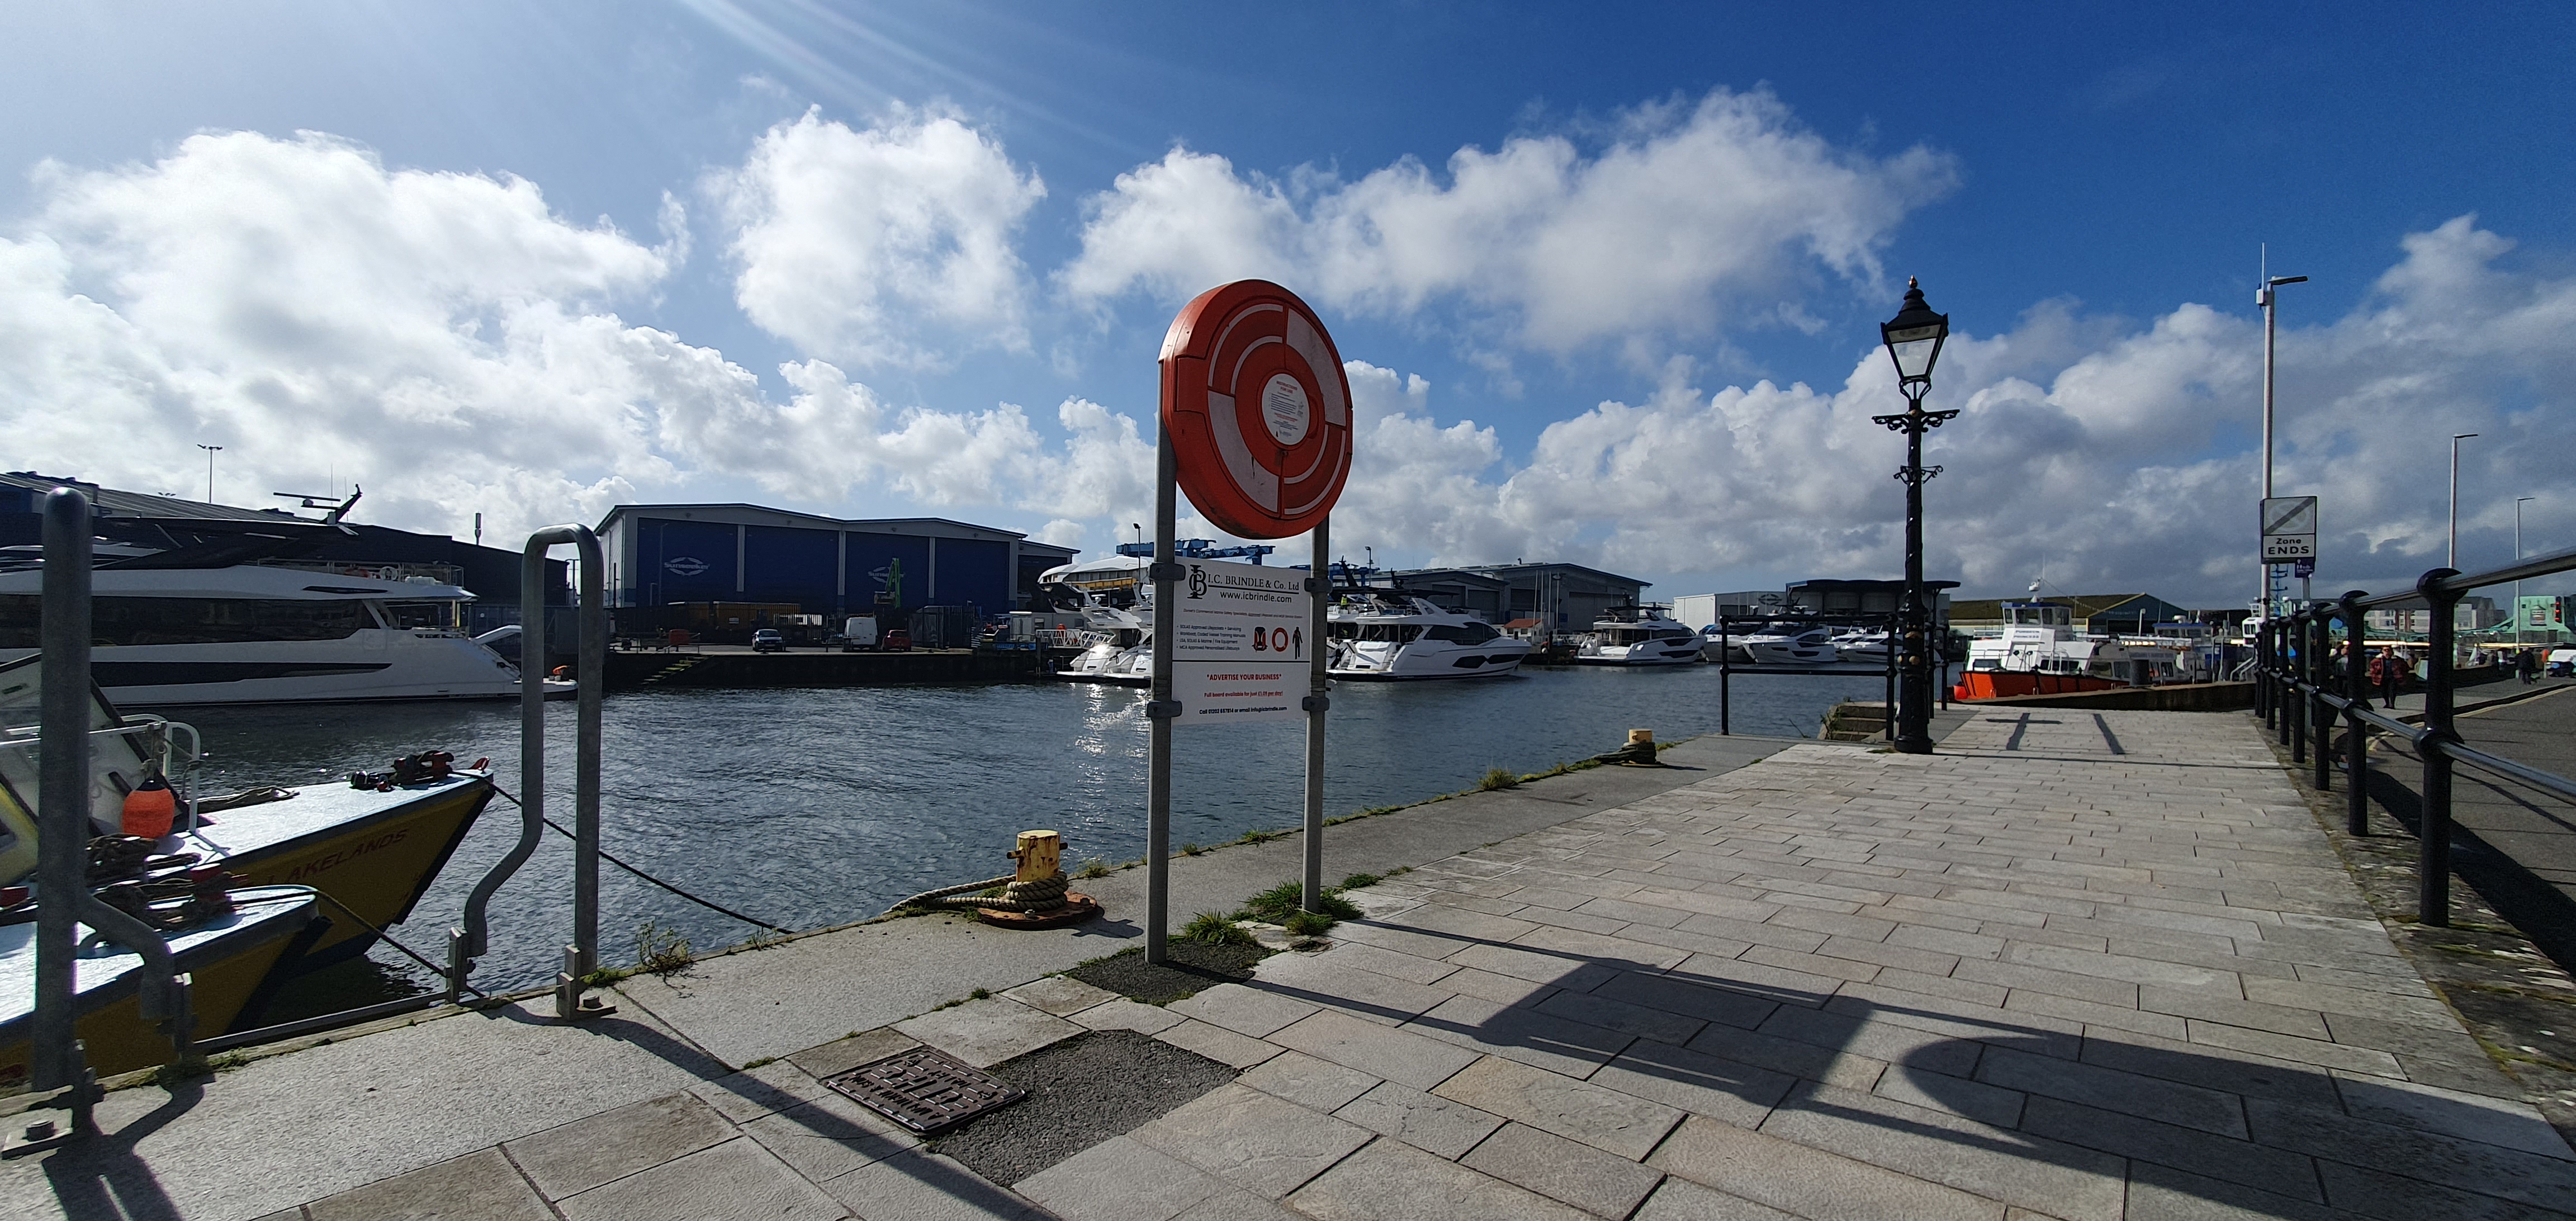 Hard Surface Lifebuoy Housing with Ad Space Signage, situated on Poole Quay, providing safety equipment and advertising opportunities in a waterfront setting